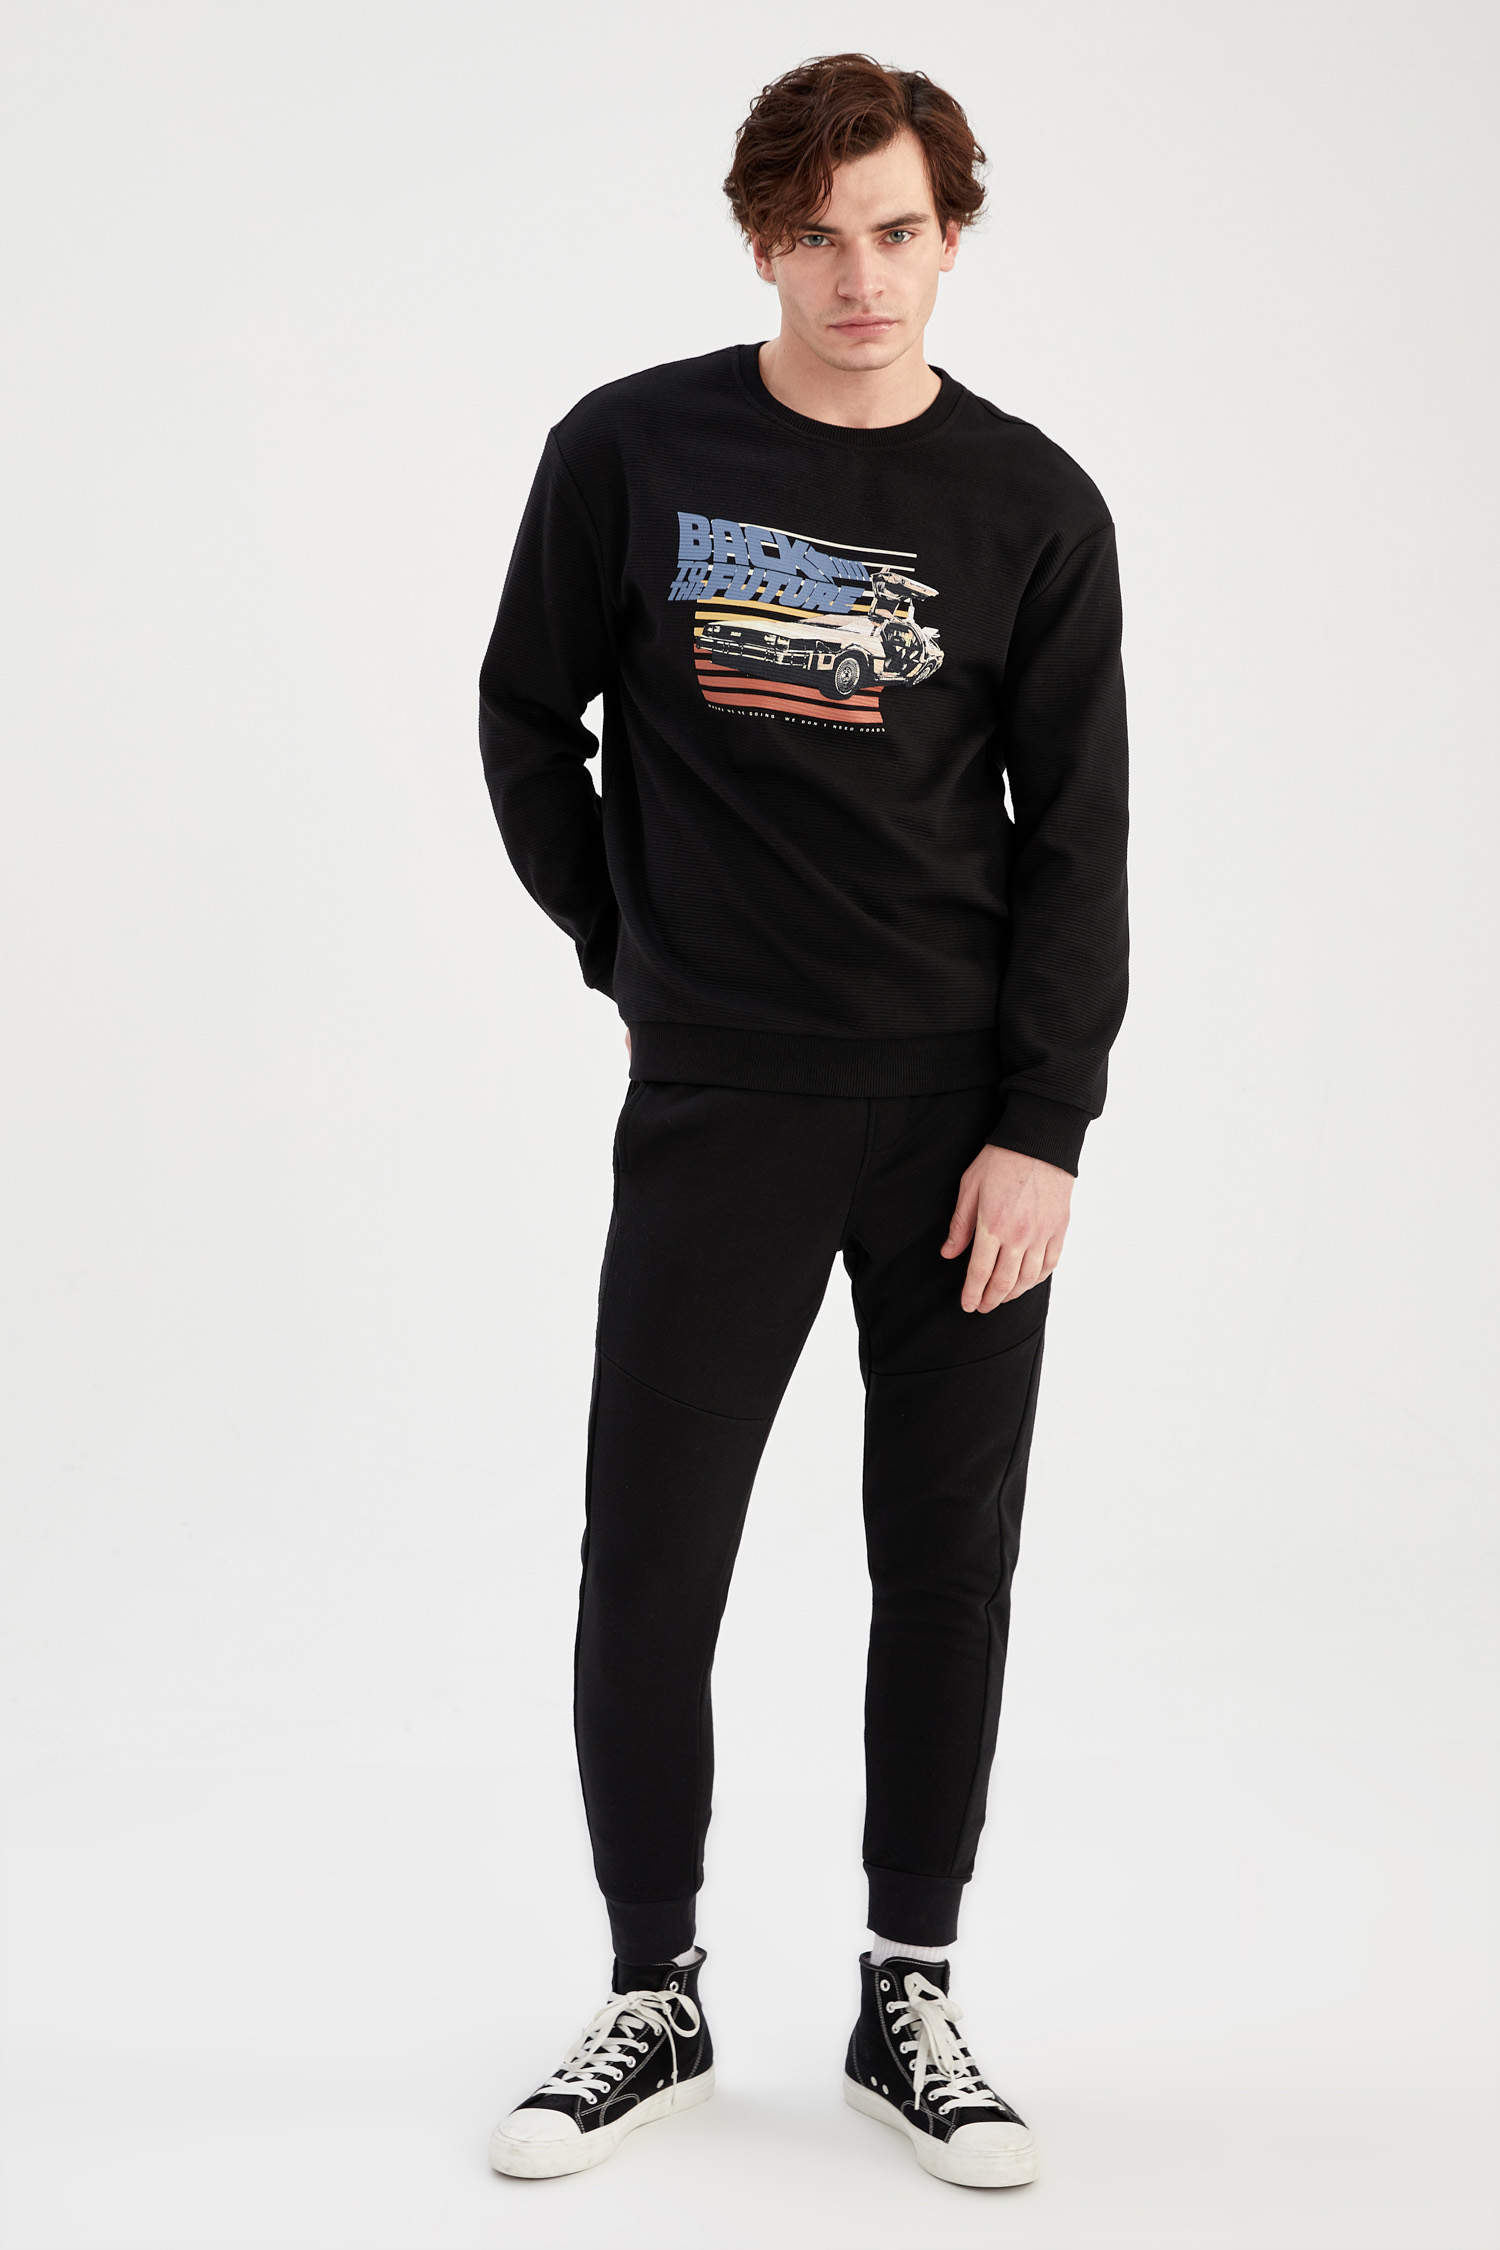 Defacto Back to the Future Relax Fit Bisiklet Yaka Sweatshirt. 2